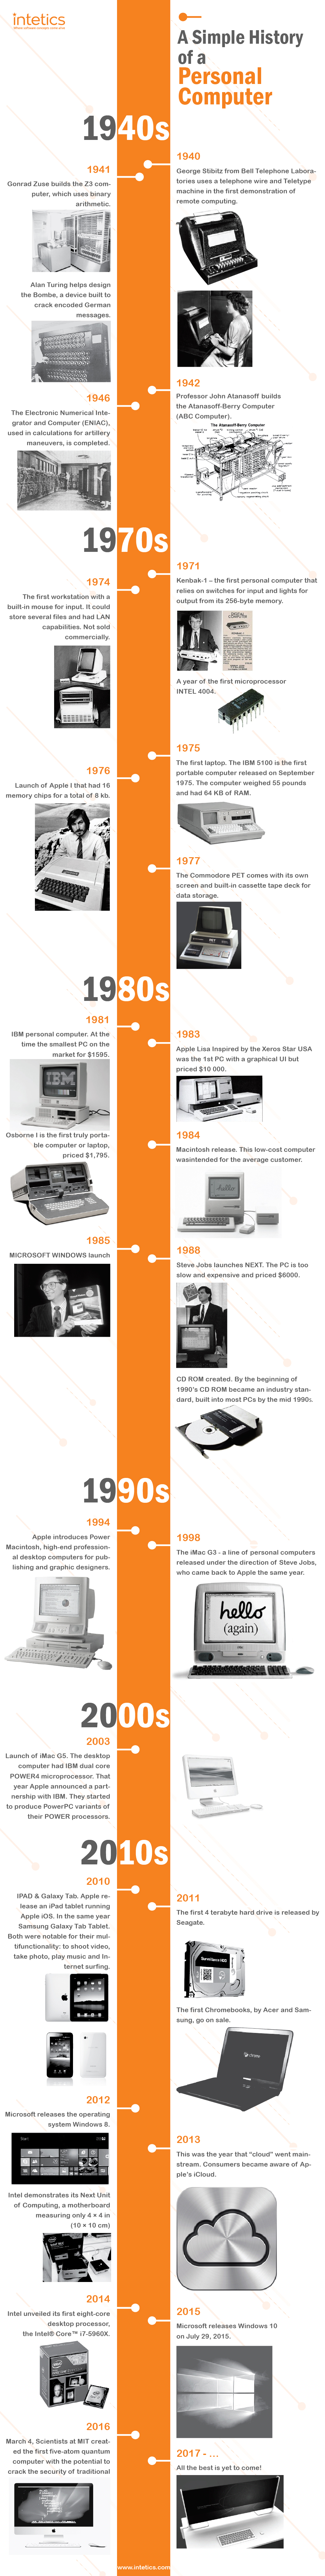 A Simple history of a personal computer